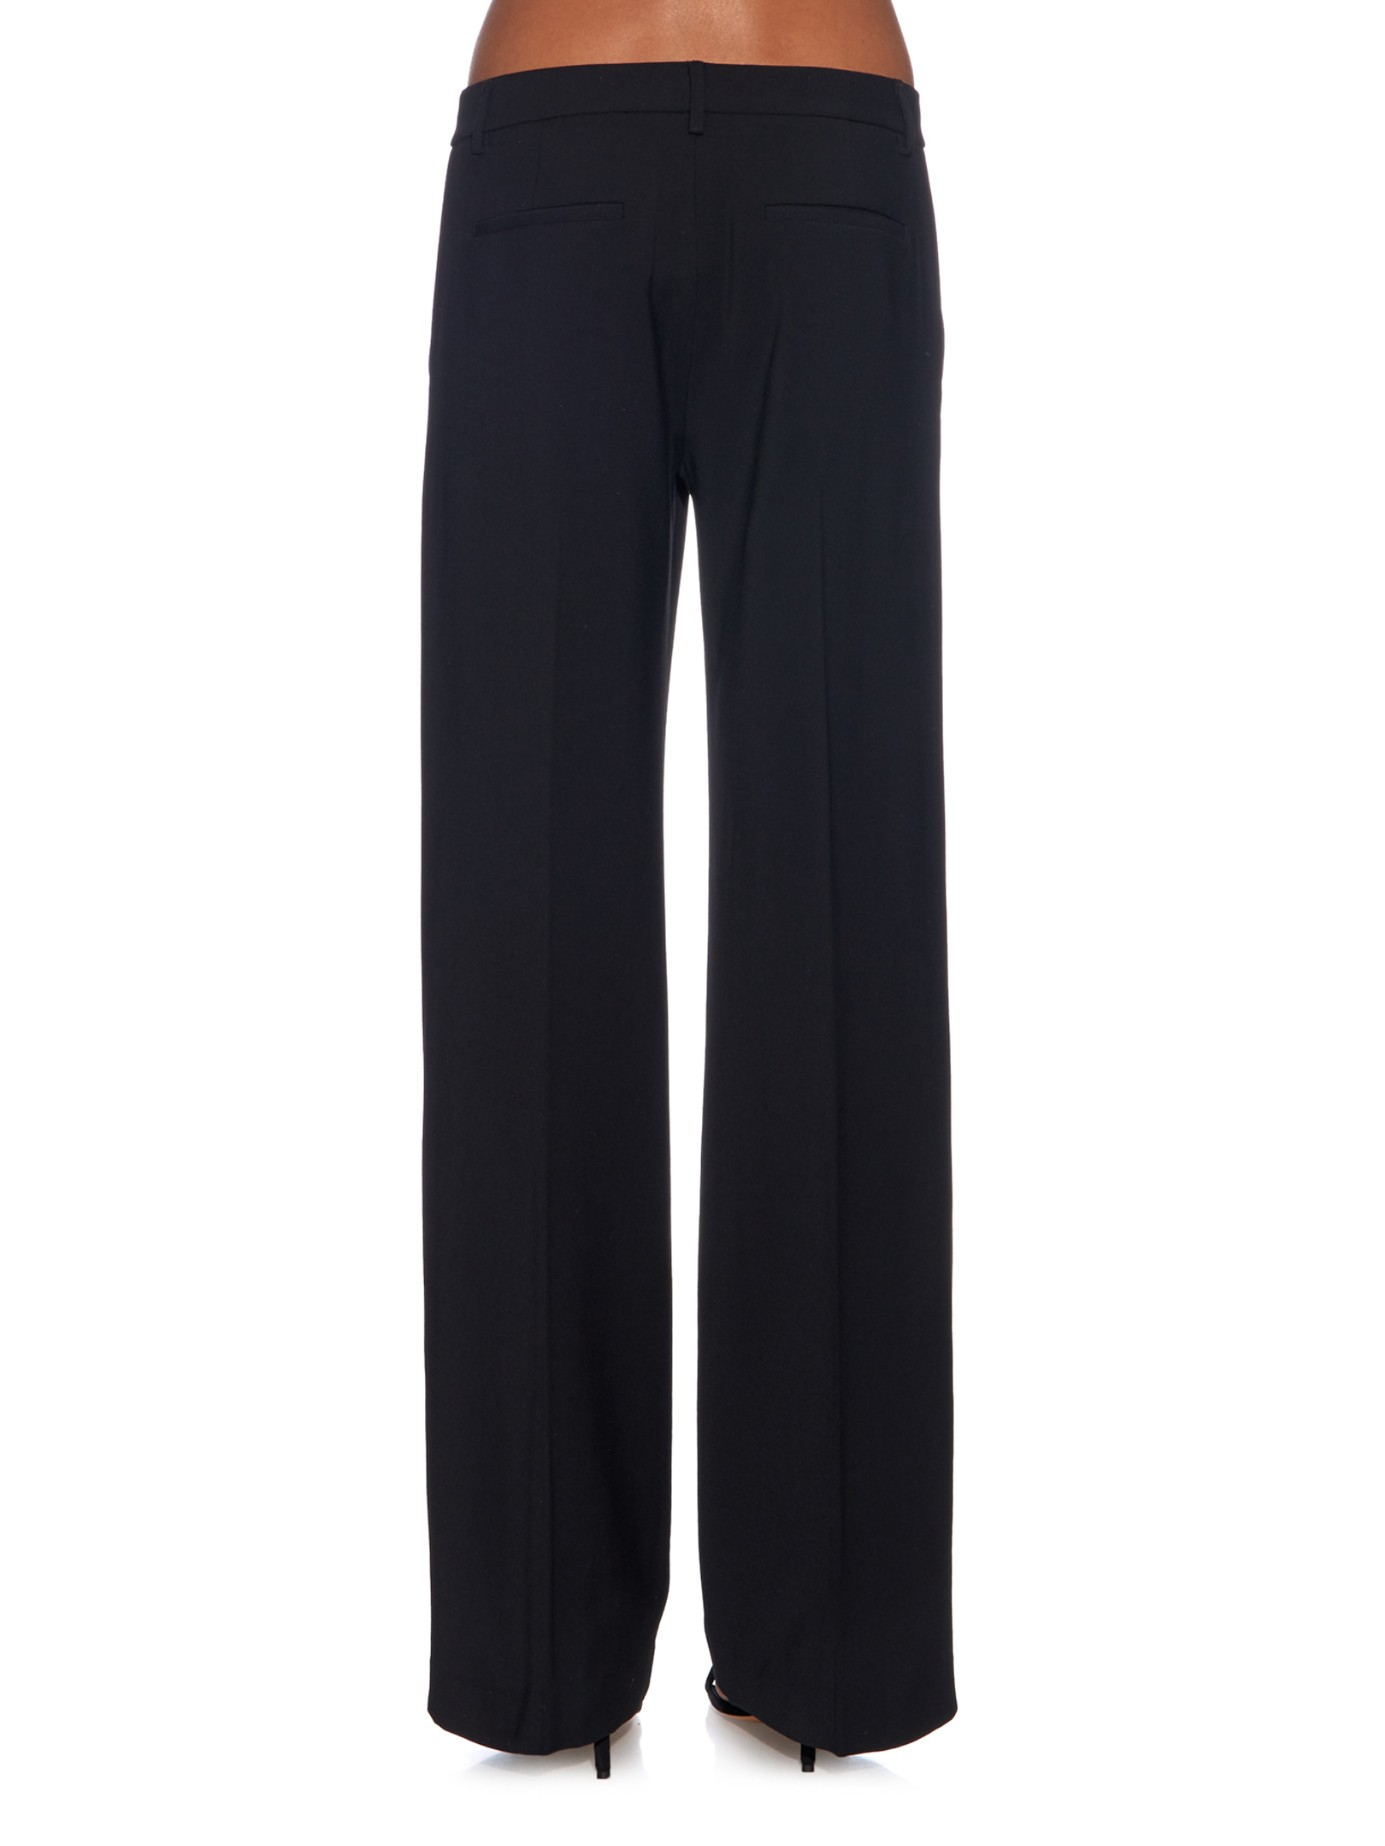 Lyst - Vince Wide-leg Stretch Trousers in Black